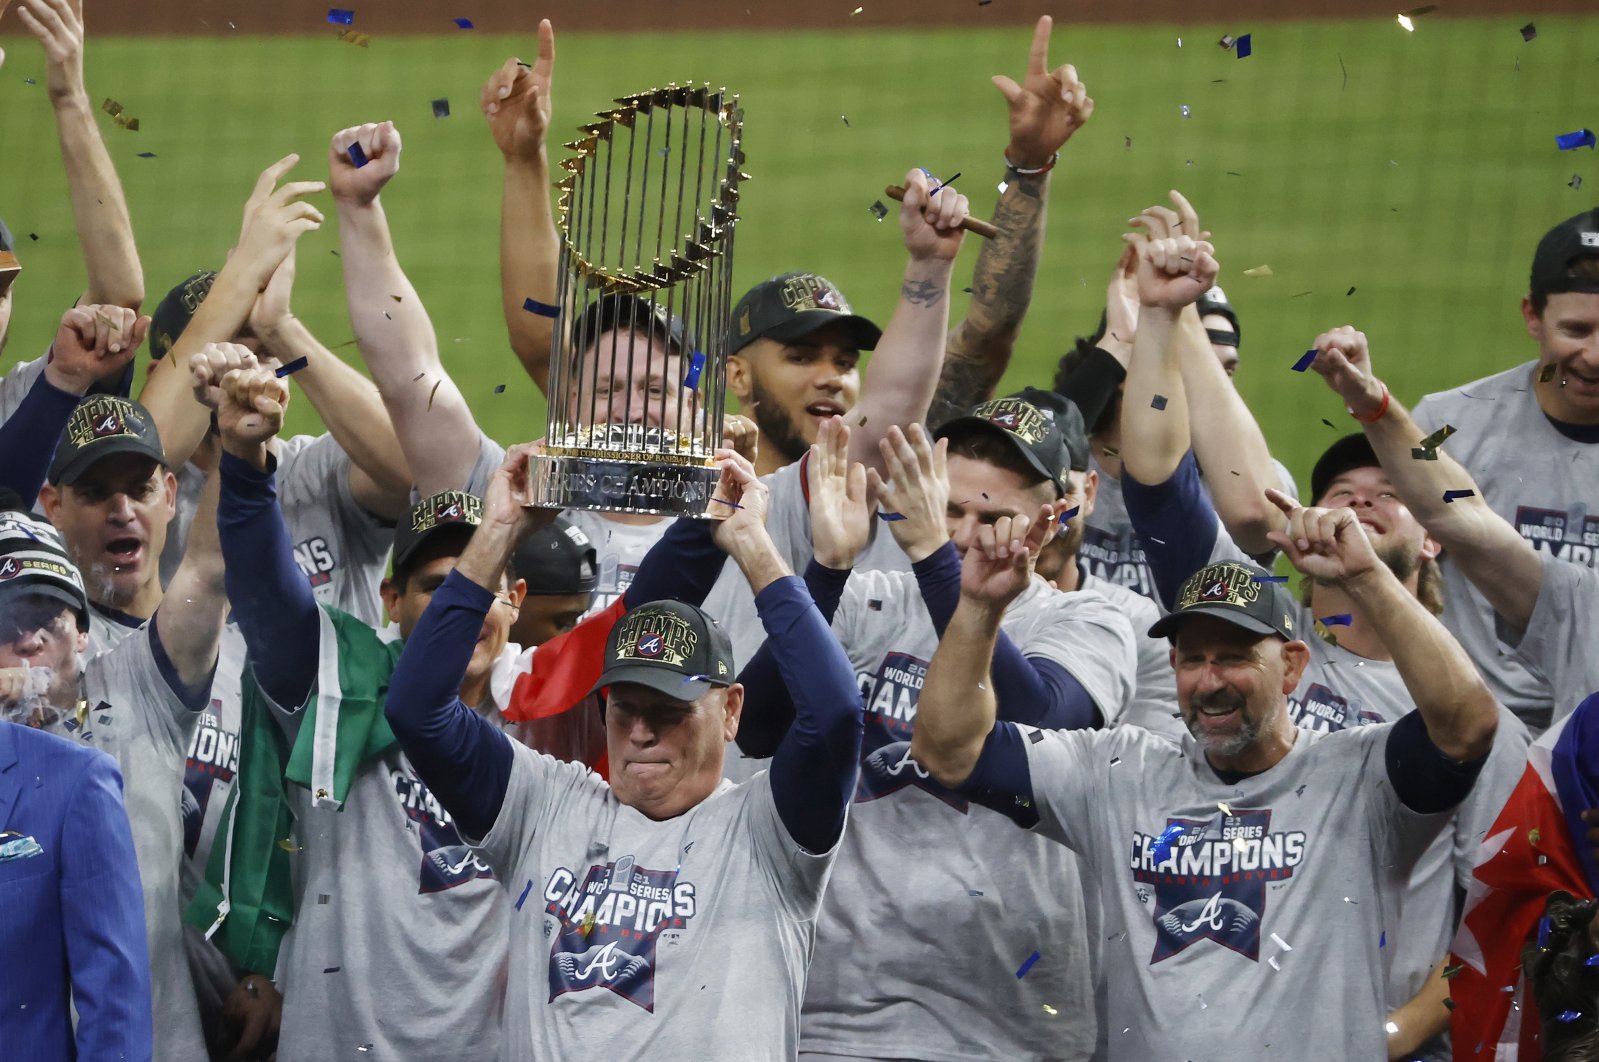 Atlanta Braves manager Brian Snitker hoists the trophy as players and staff celebrate the baseball World Series win over the Houston Astros, Houston, Texas, U.S., Nov. 2, 2021. (AP Photo)